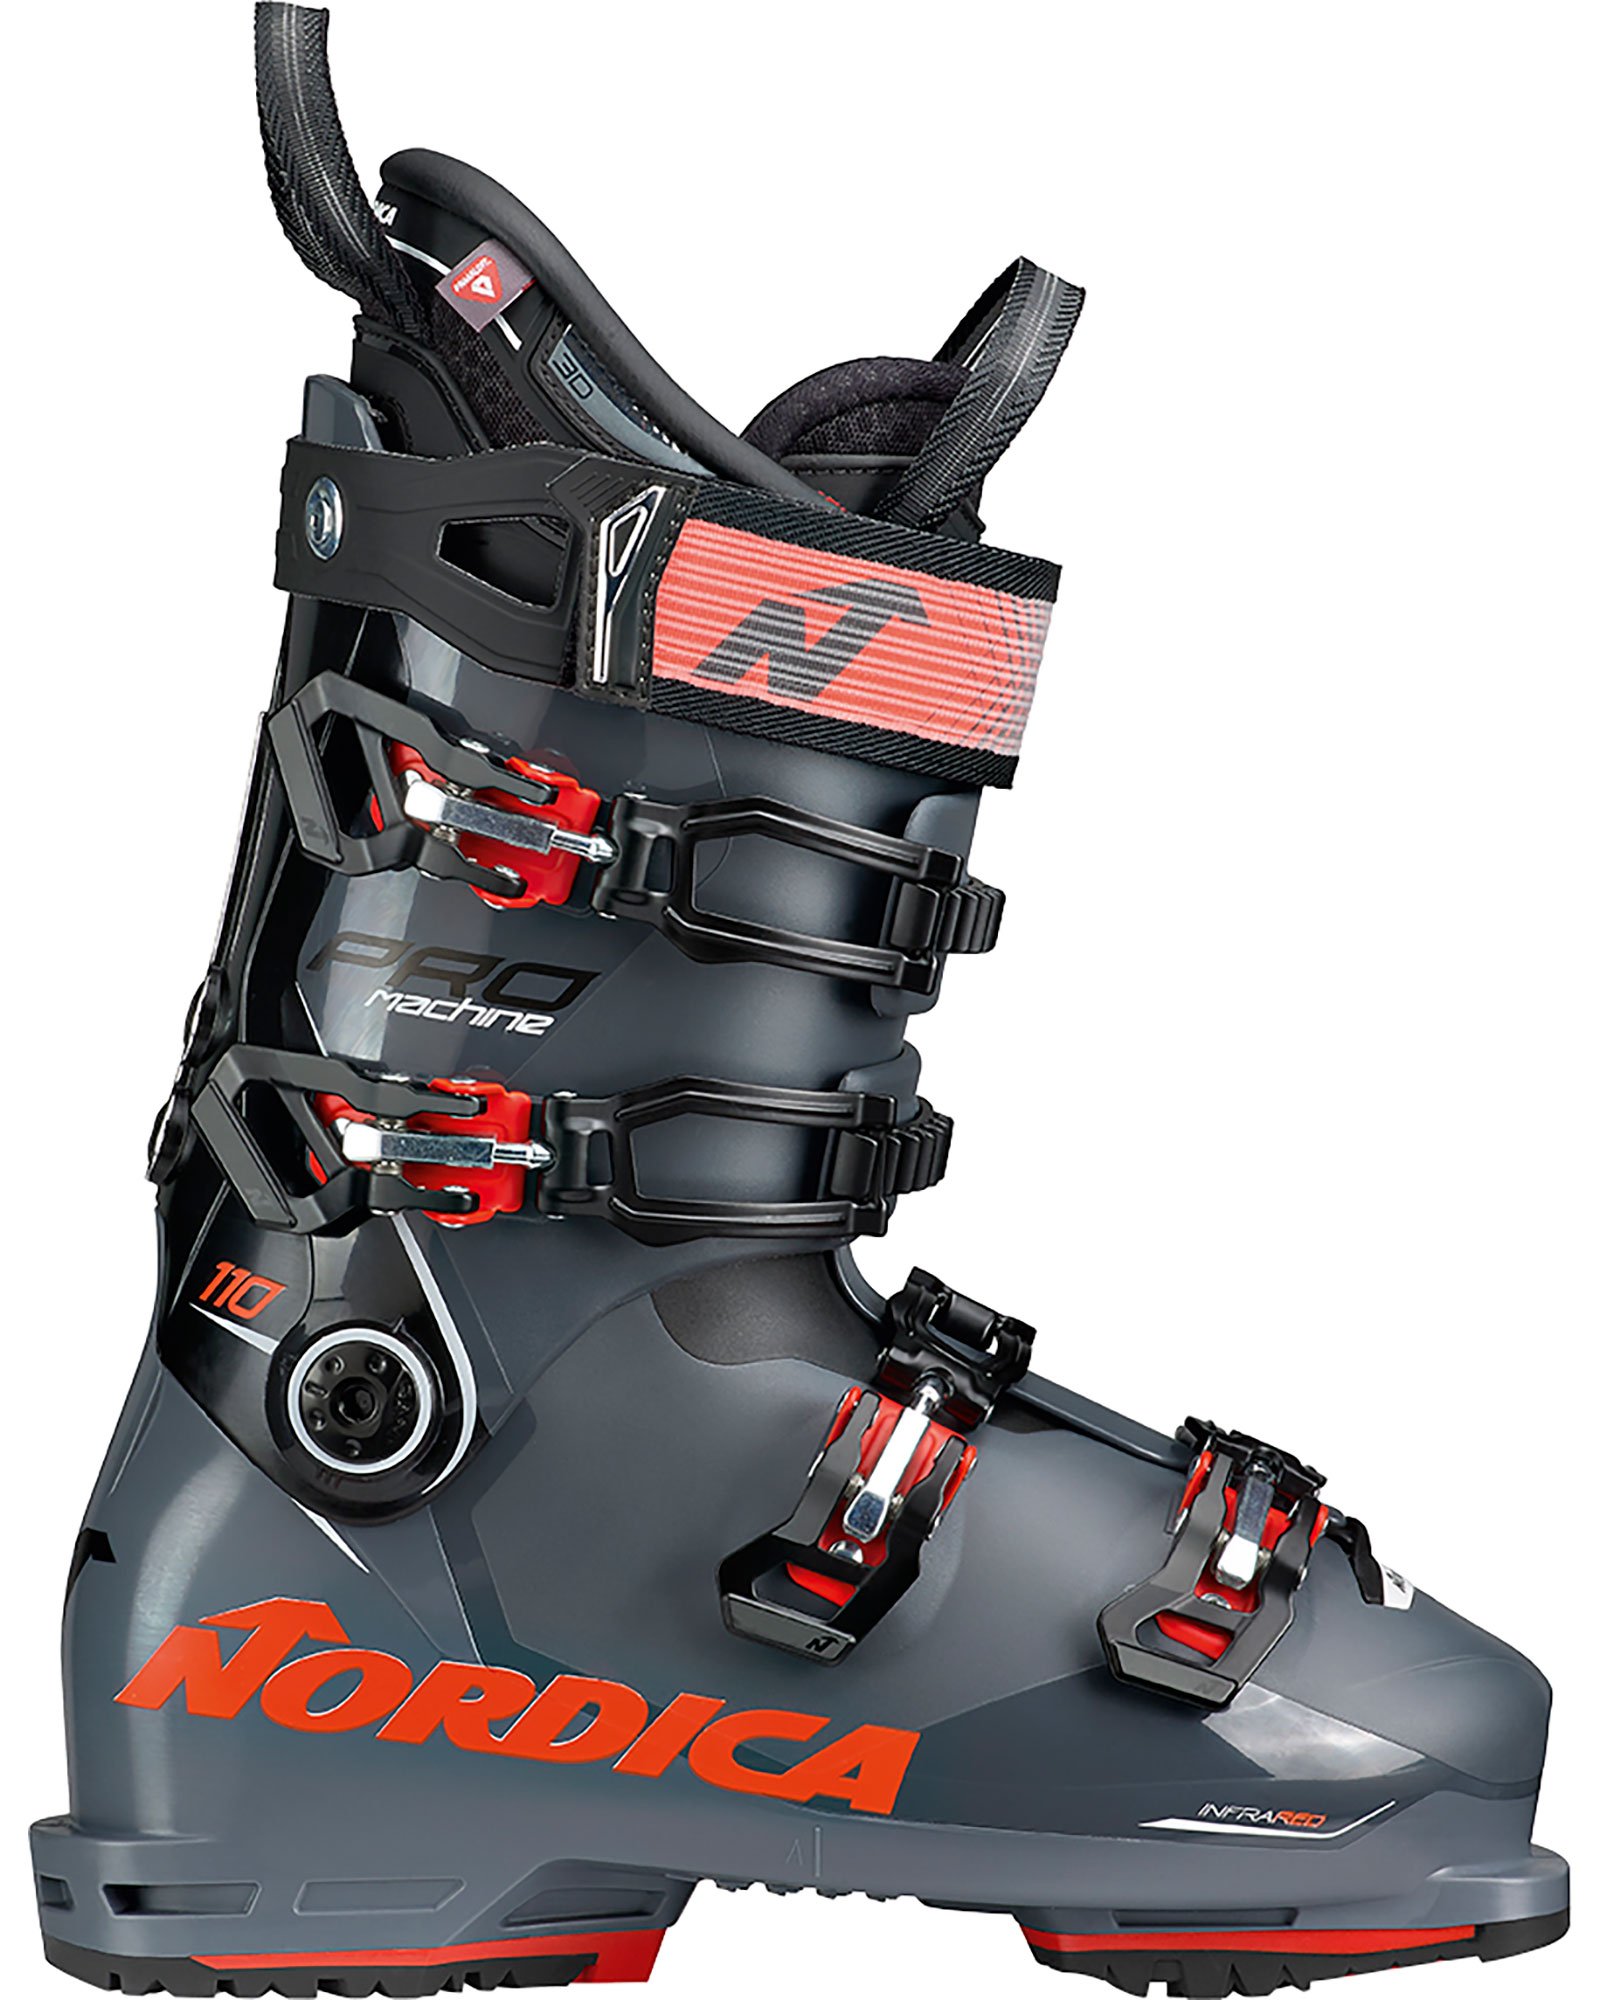 on the other hand, snorkel Dear How To Choose The Right Ski Boots | Ellis Brigham Mountain Sports